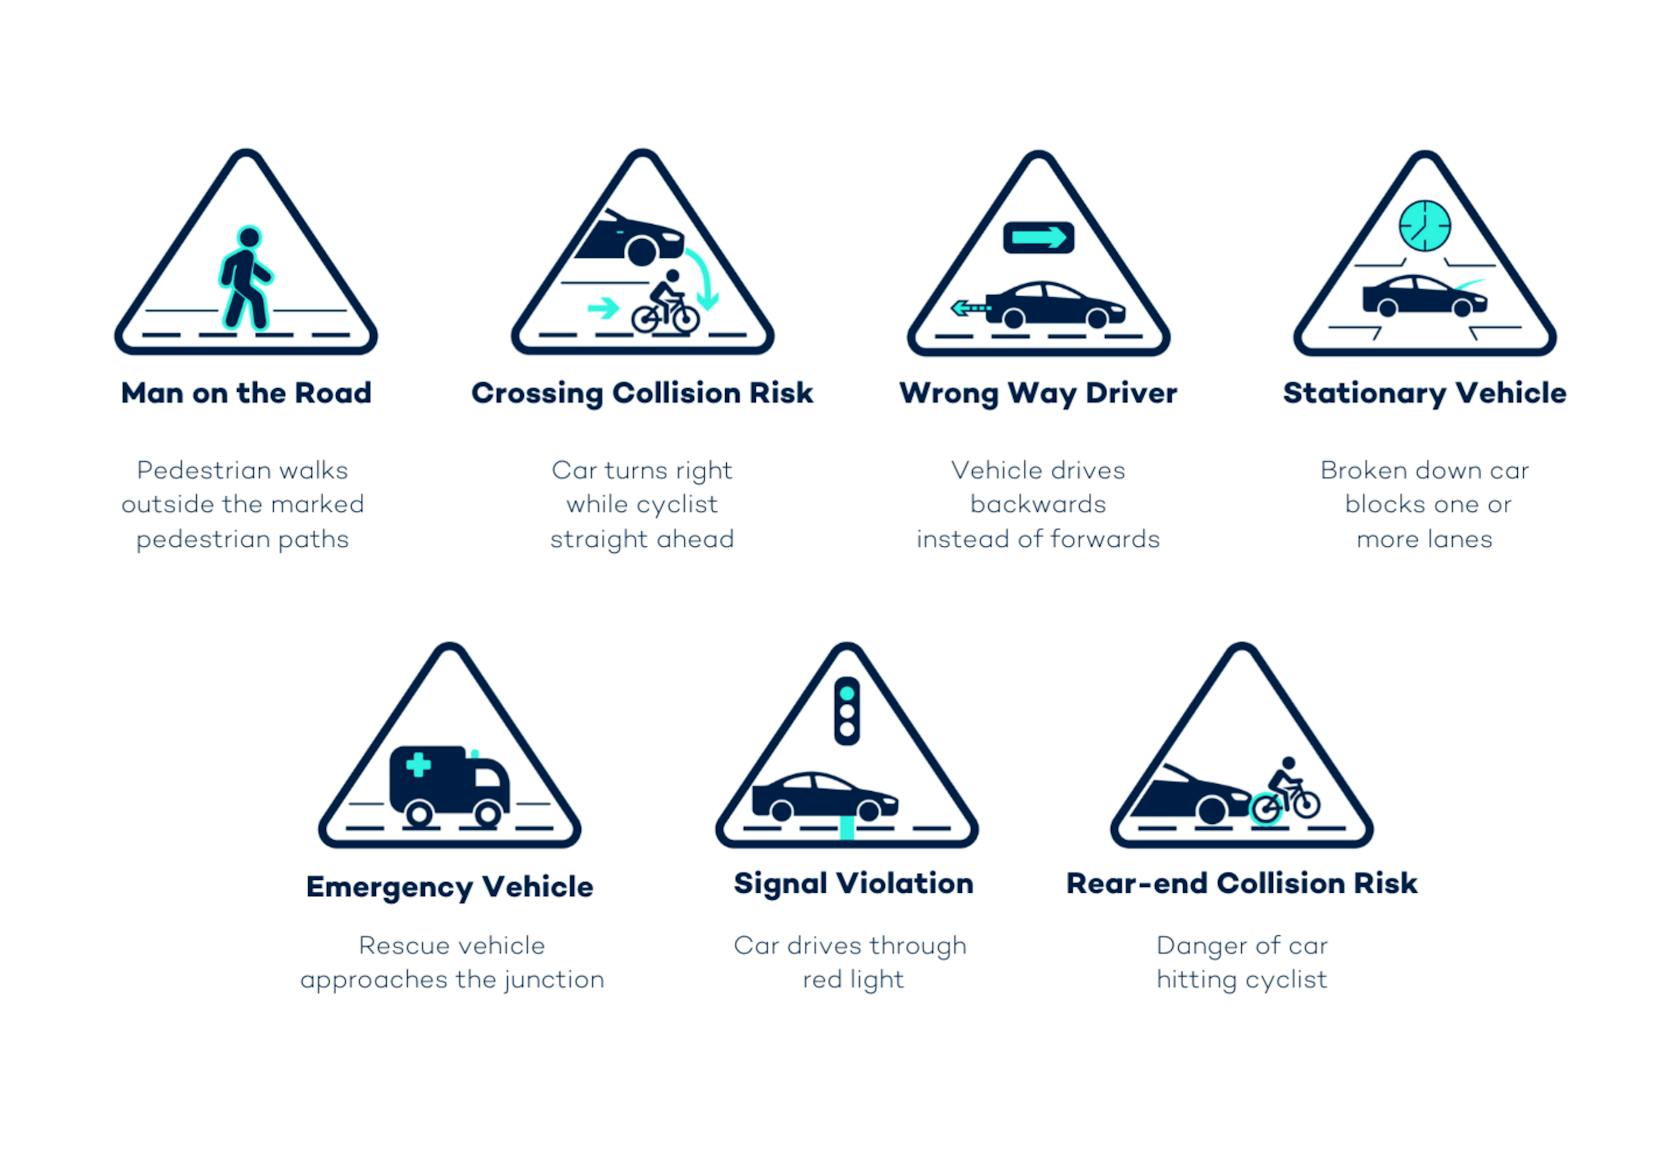 Seven potentially dangerous situations at junctions where there is a risk of collision between road users.